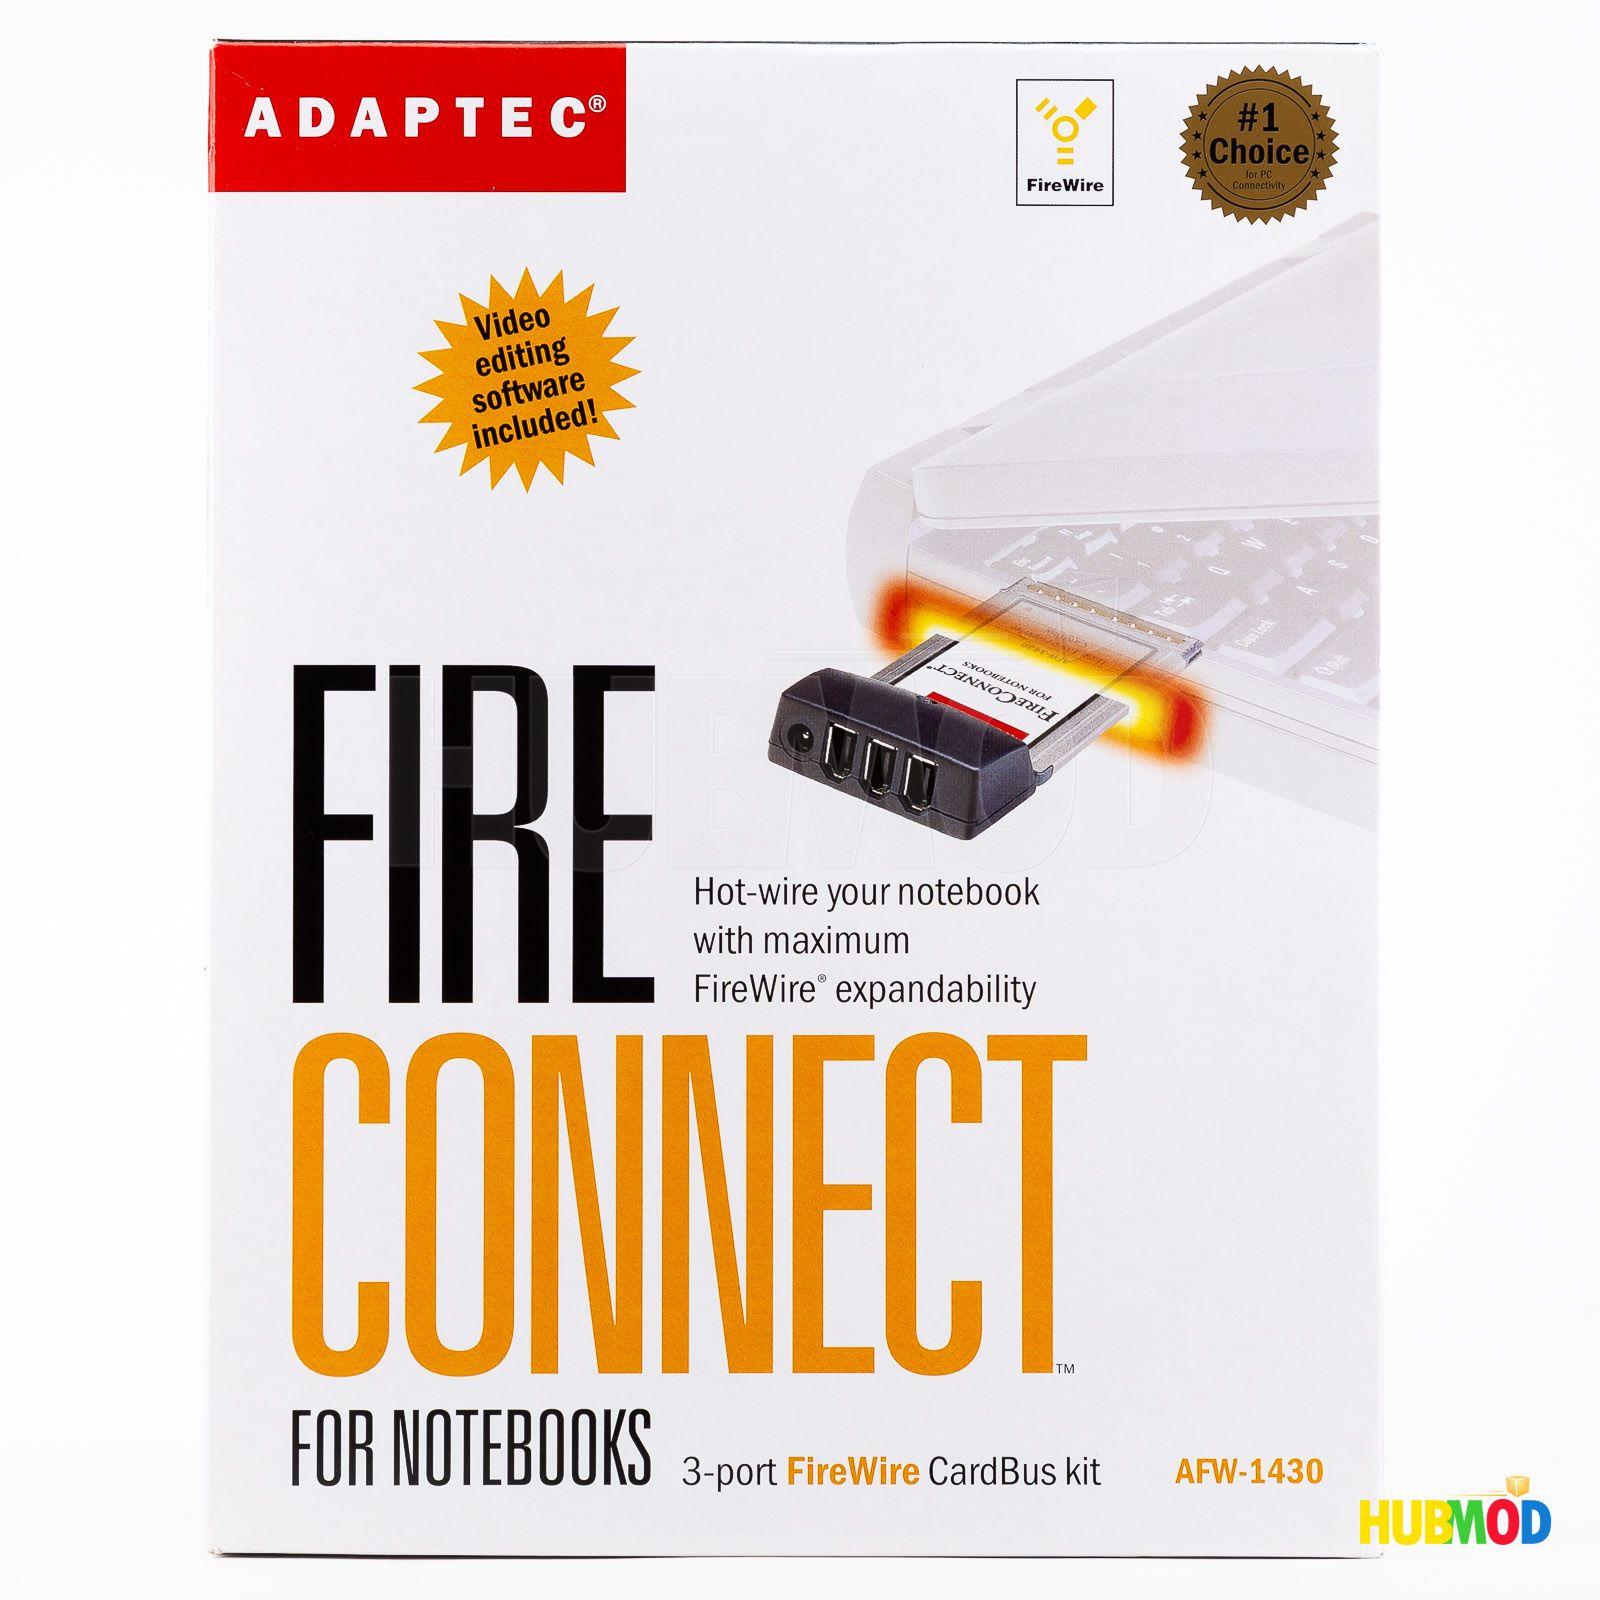 FireWire Logo - Details about NEW Adaptec 3-Port FireWire IEEE 1394 CardBus Kit AFW-1430  for Notebooks Laptops